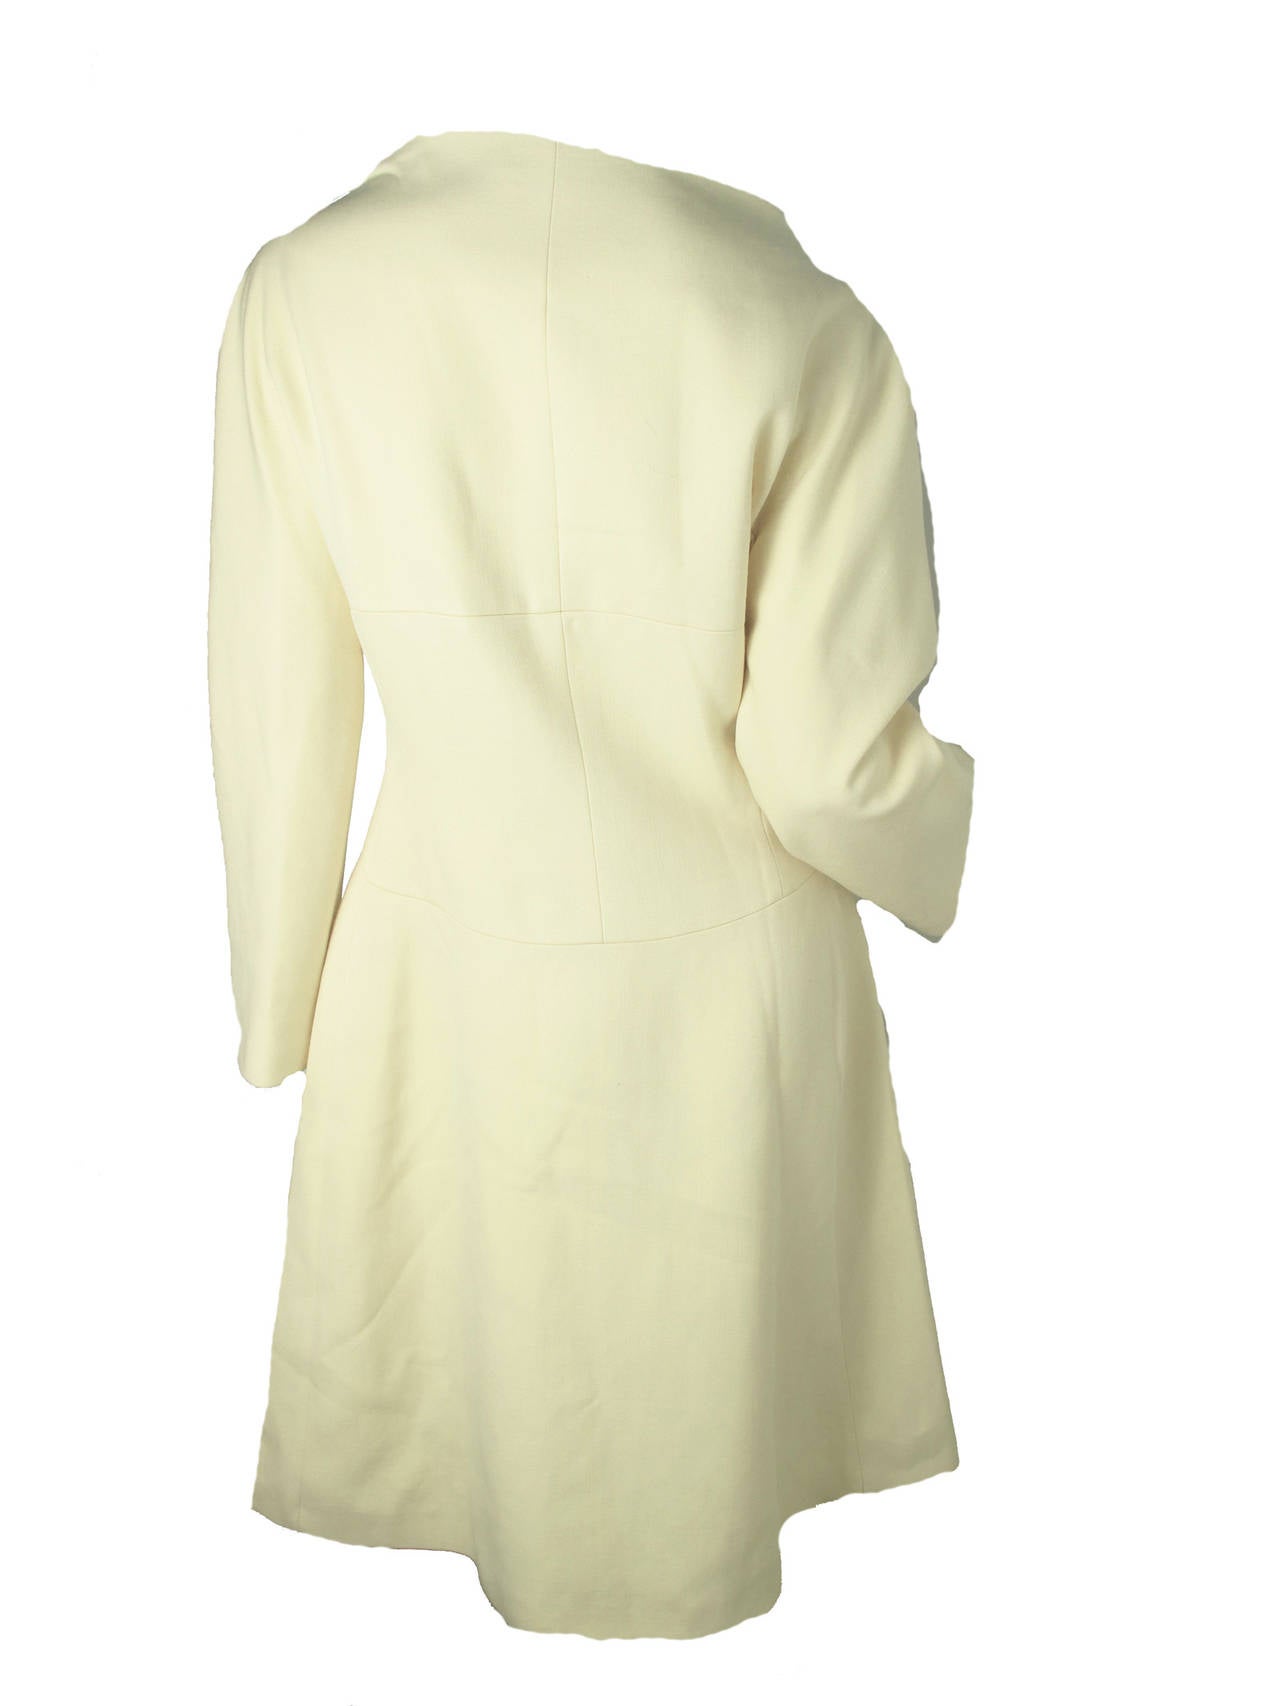 Ungaro cream wool coat with boat neck collar. Bright yellow silk lining. Snaps to close.  Condition: Good. 

Size 10 / US 6

38